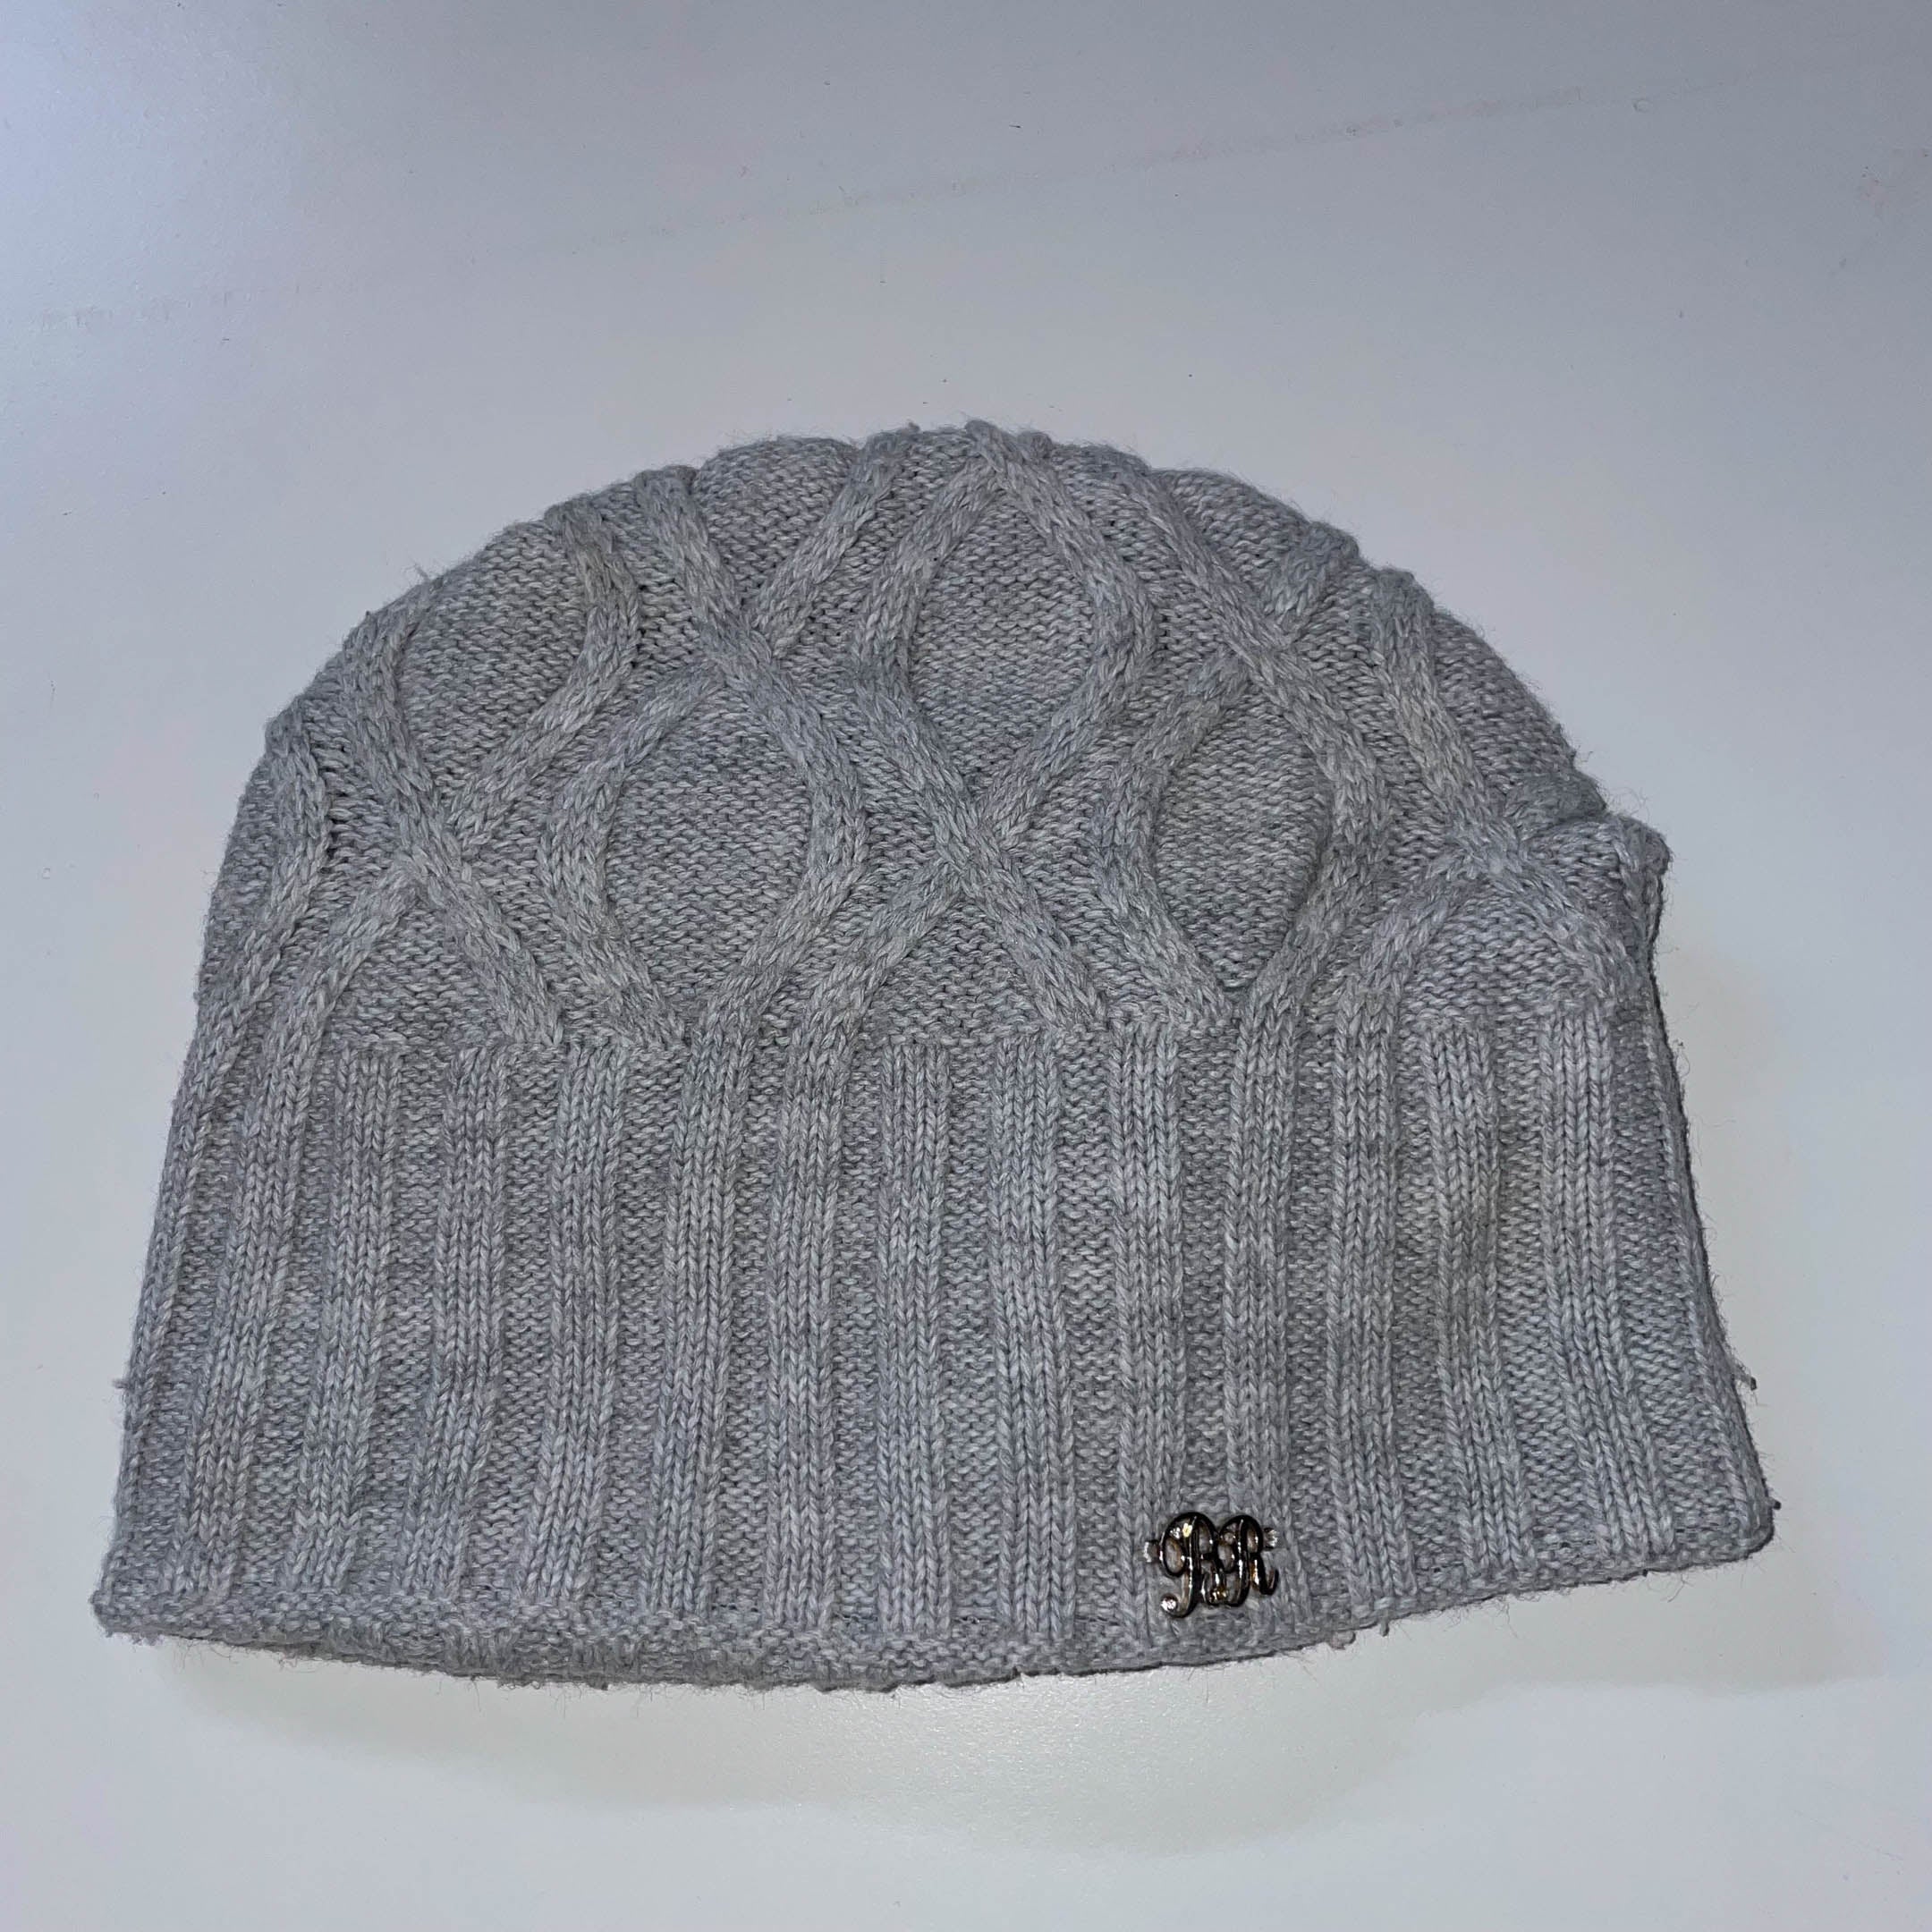 Vintage cable pattern knitted grey beanie cap| One size| grey| SKU 3683